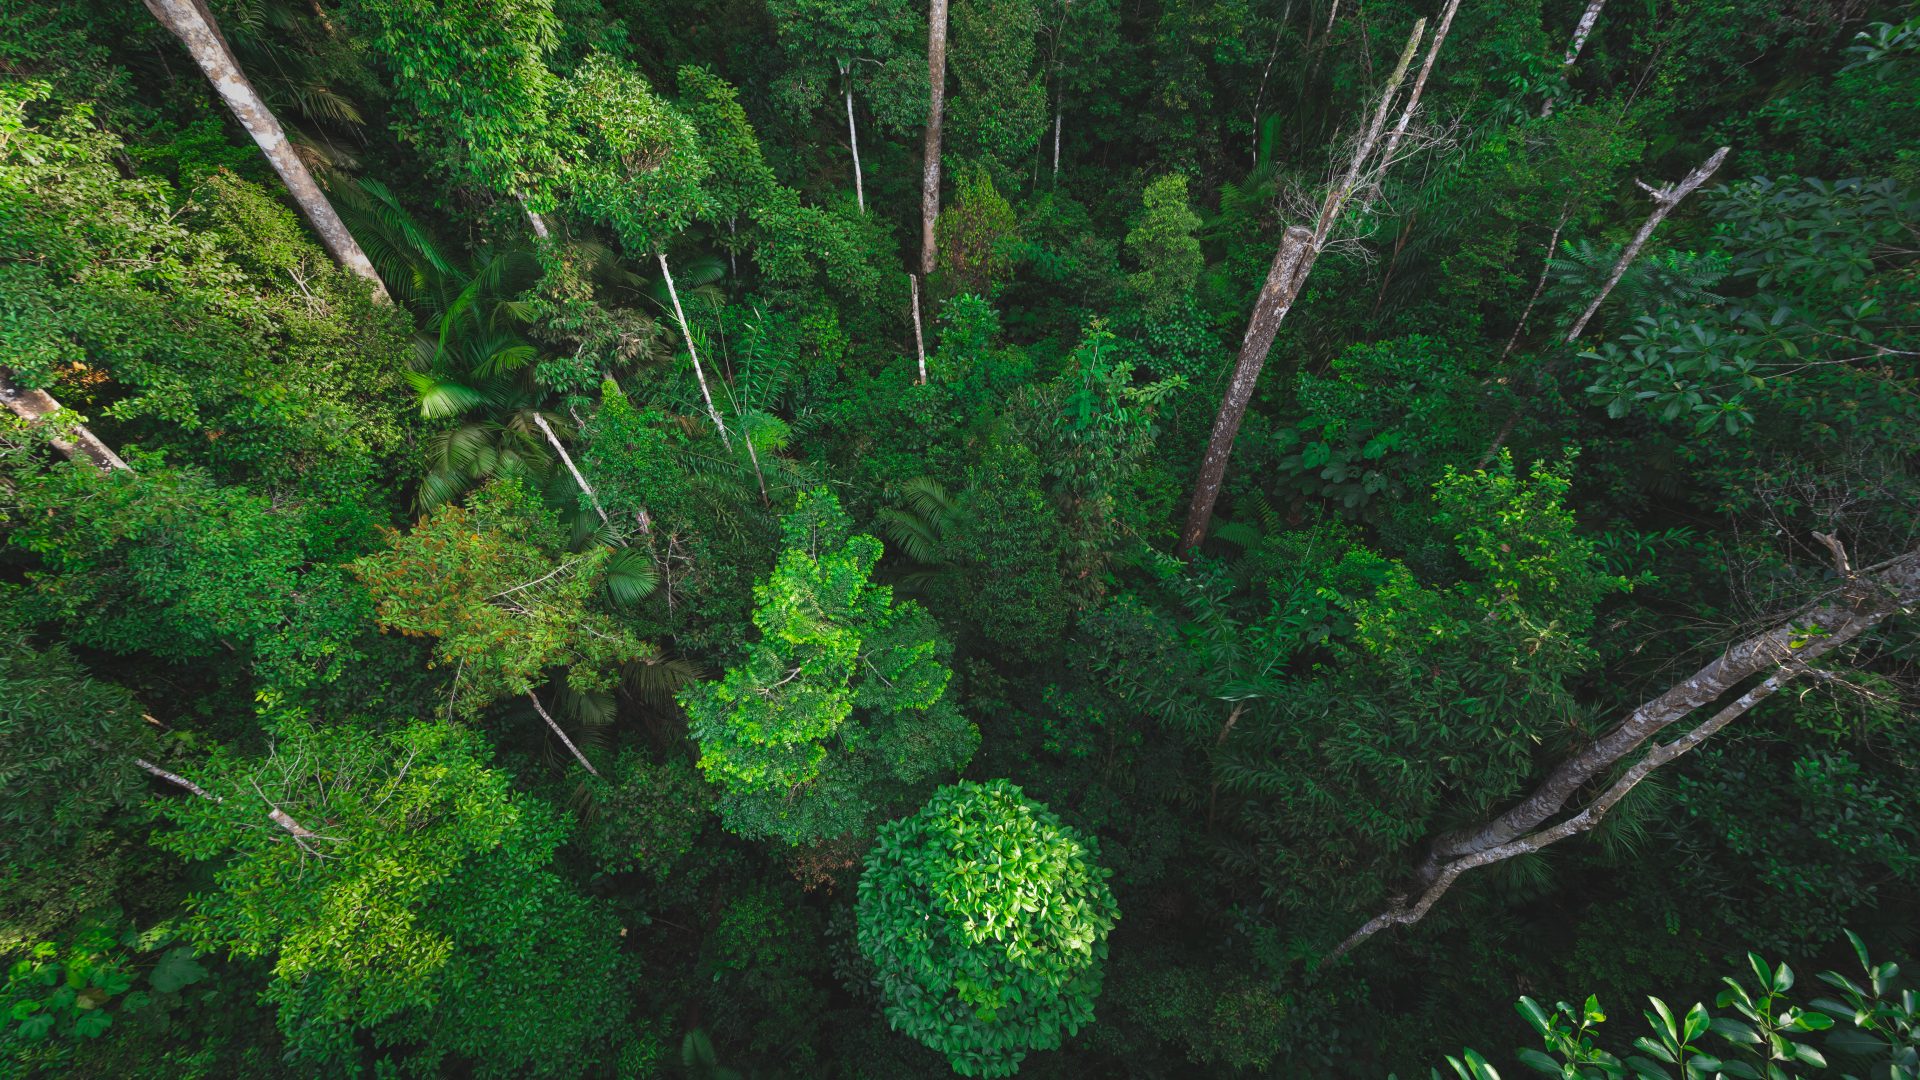 A view down to the forest floor from within the rainforest canopy.